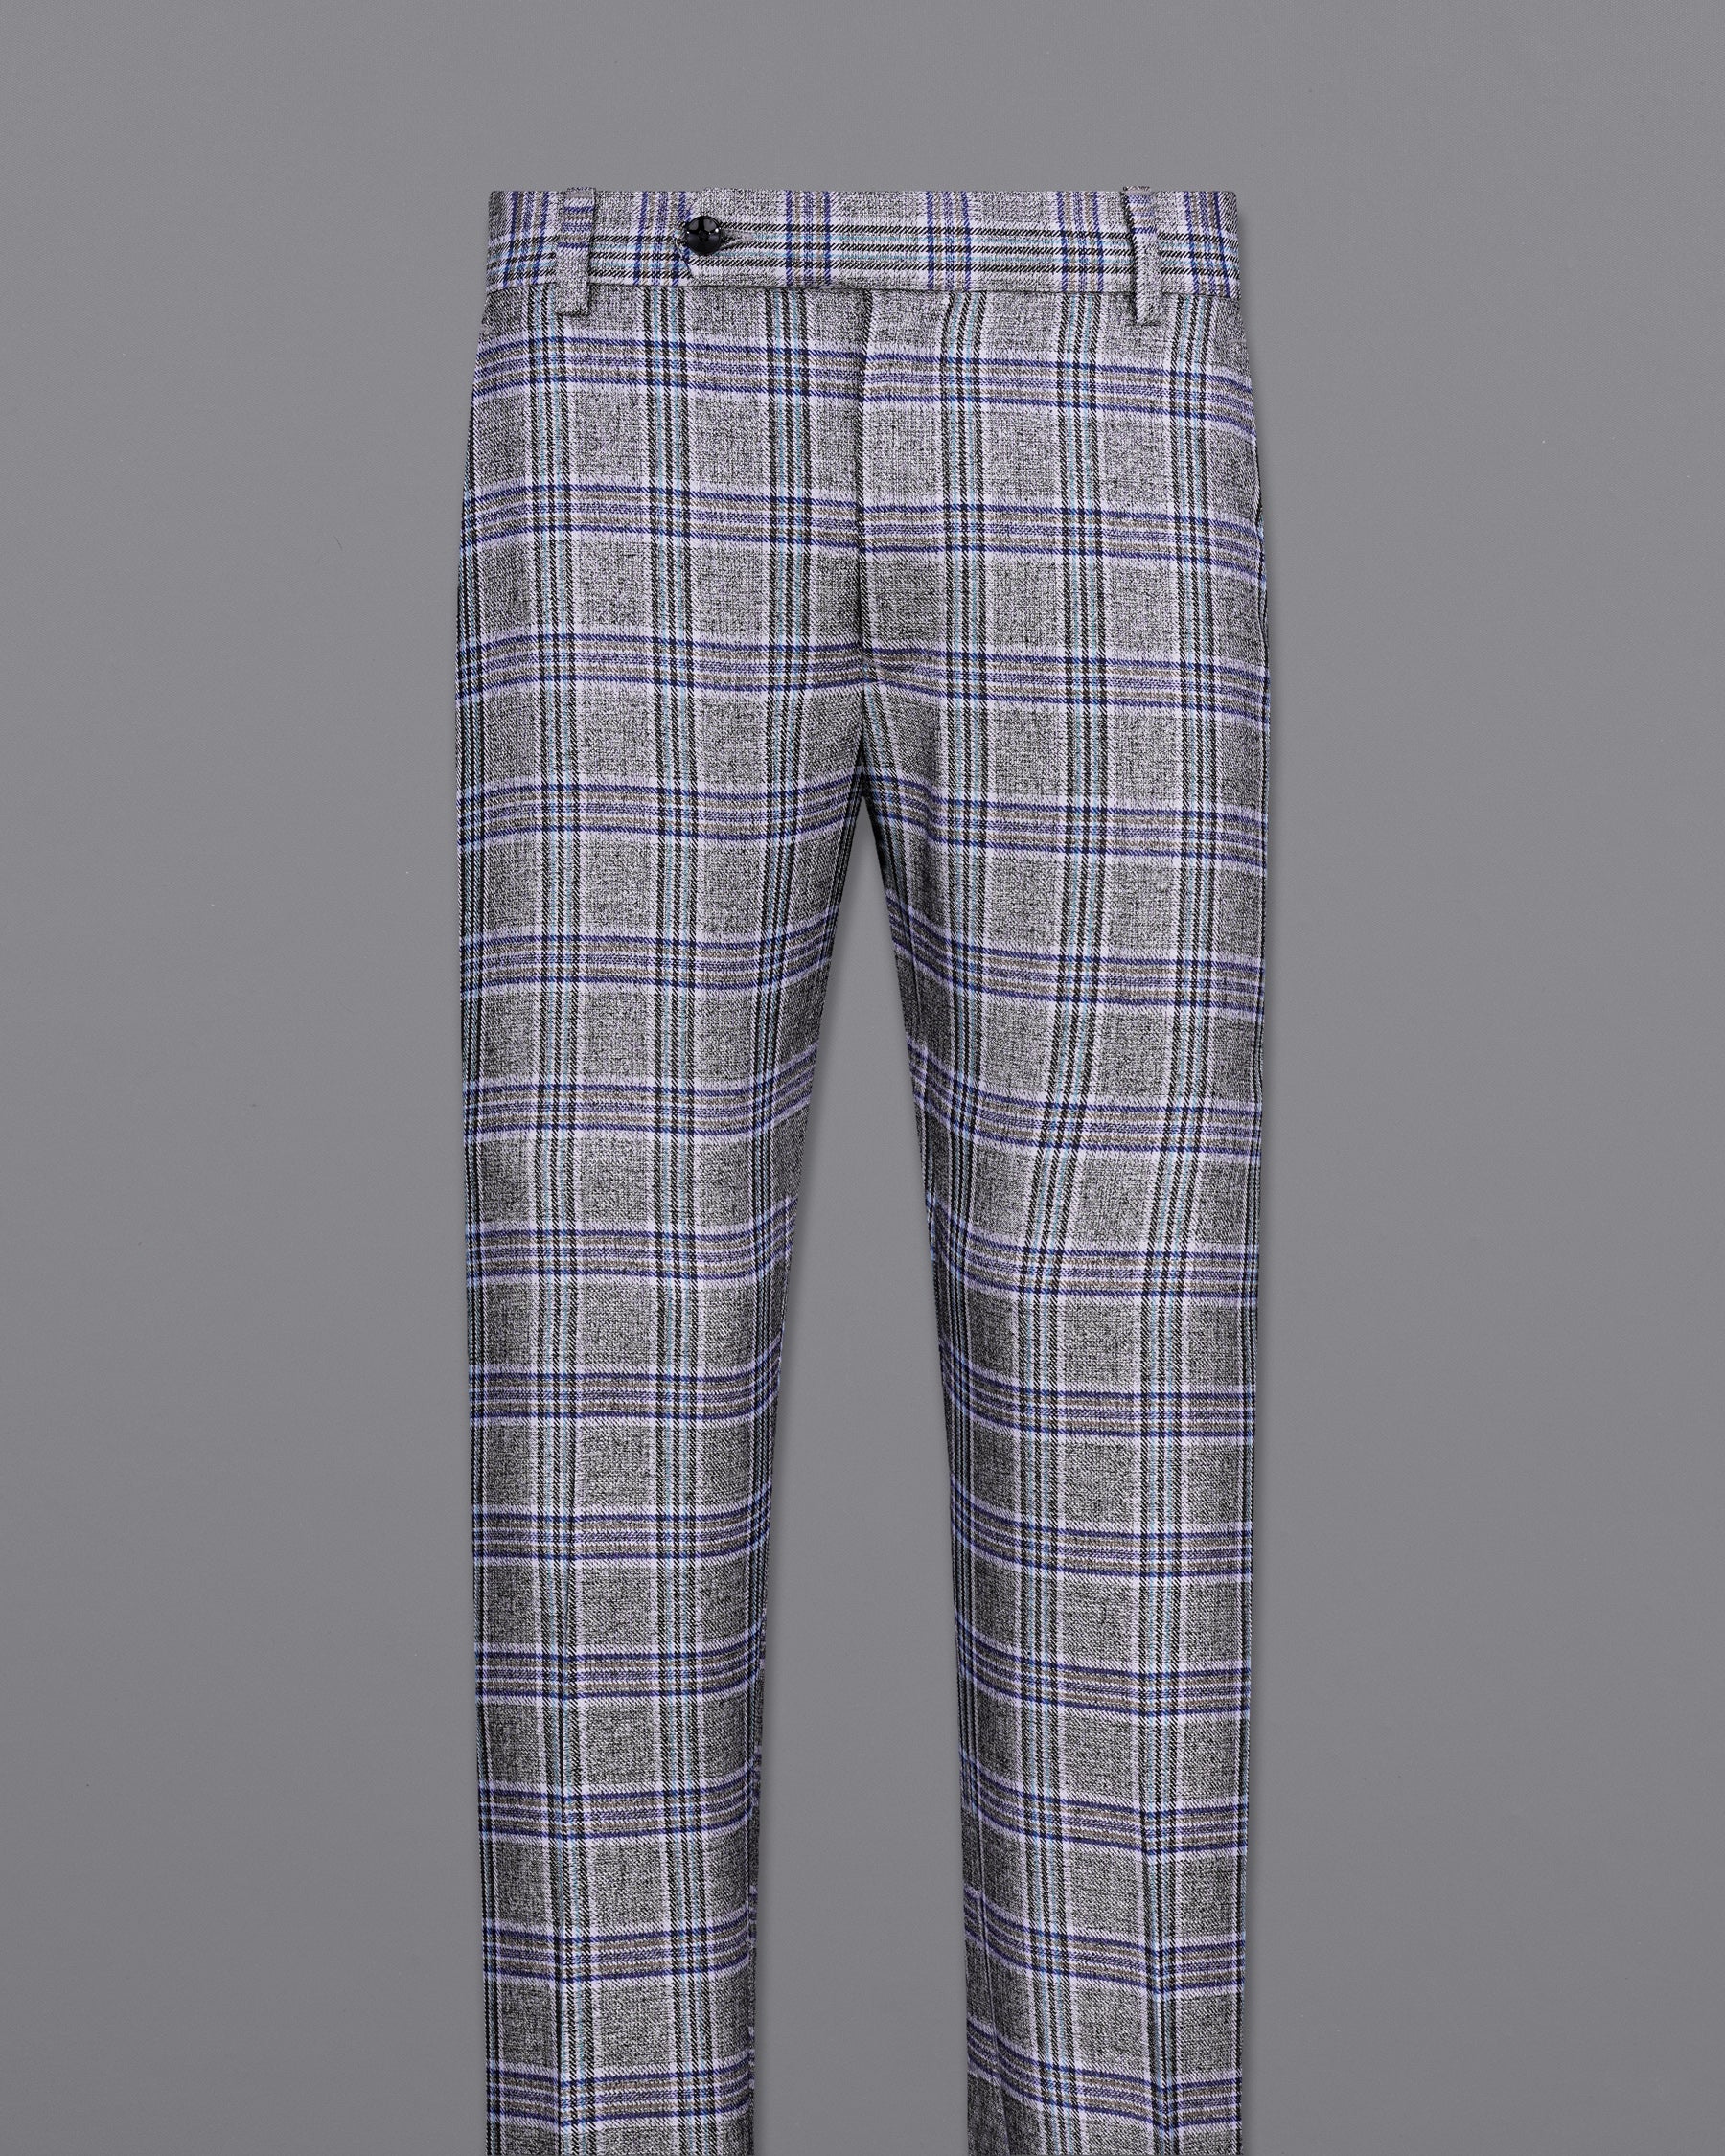 StarDust Gray with Martinique Blue Plaid Bandhgala Suit ST2145-BG-36, ST2145-BG-38, ST2145-BG-40, ST2145-BG-42, ST2145-BG-44, ST2145-BG-46, ST2145-BG-48, ST2145-BG-50, ST2145-BG-52, ST2145-BG-54, ST2145-BG-56, ST2145-BG-58, ST2145-BG-60
